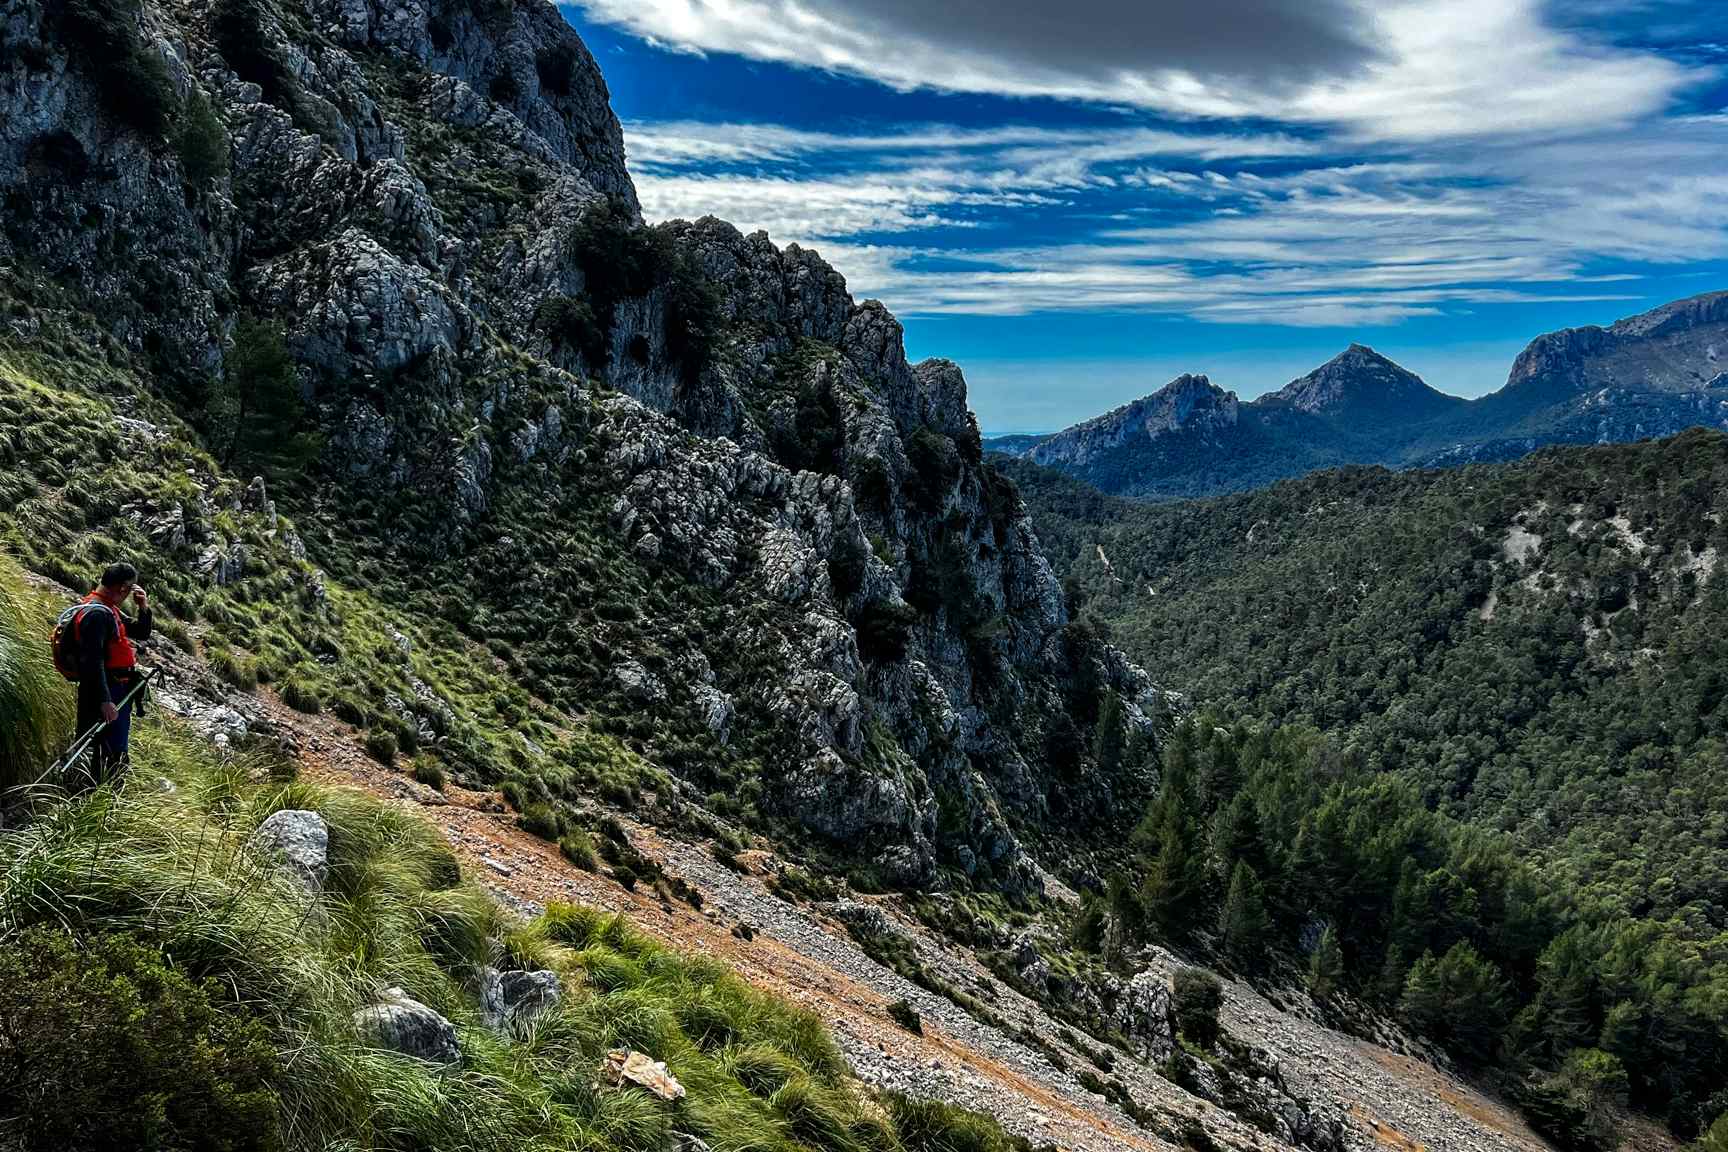 Hiking along the GR221 in Mallorca. Photo: Host/Rumbo a Picos